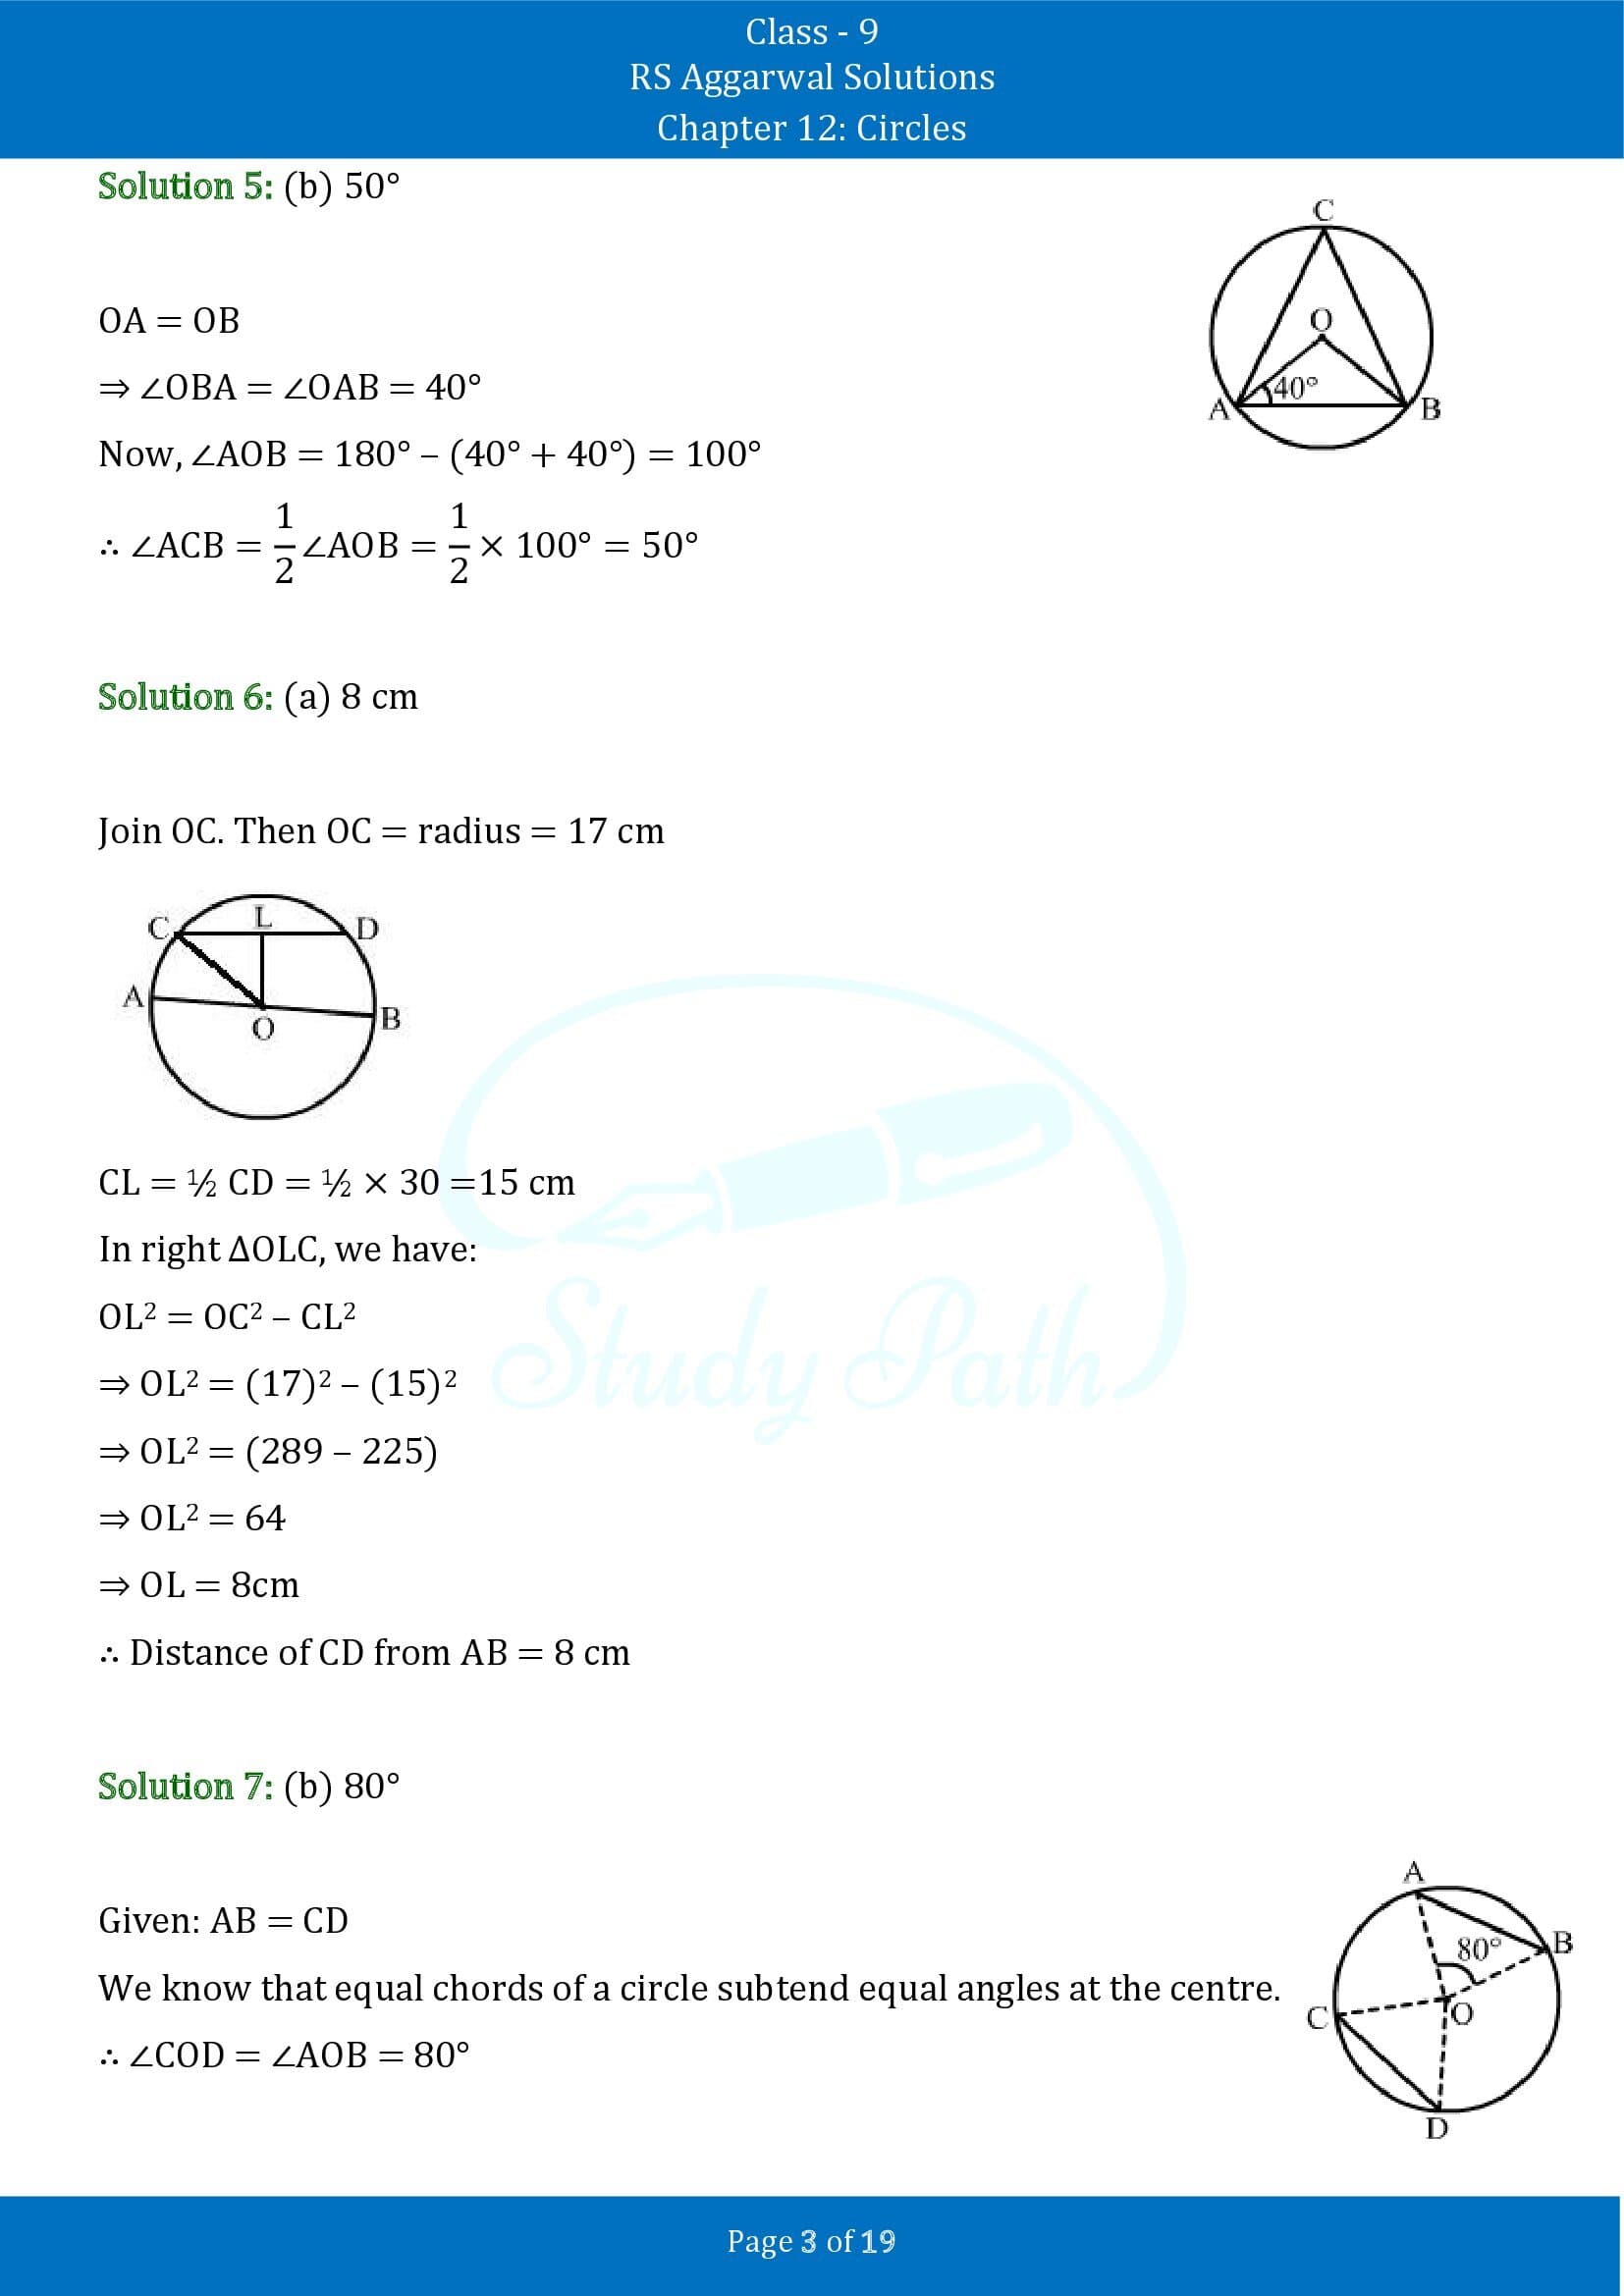 RS Aggarwal Solutions Class 9 Chapter 12 Circles Multiple Choice Questions MCQs 00003